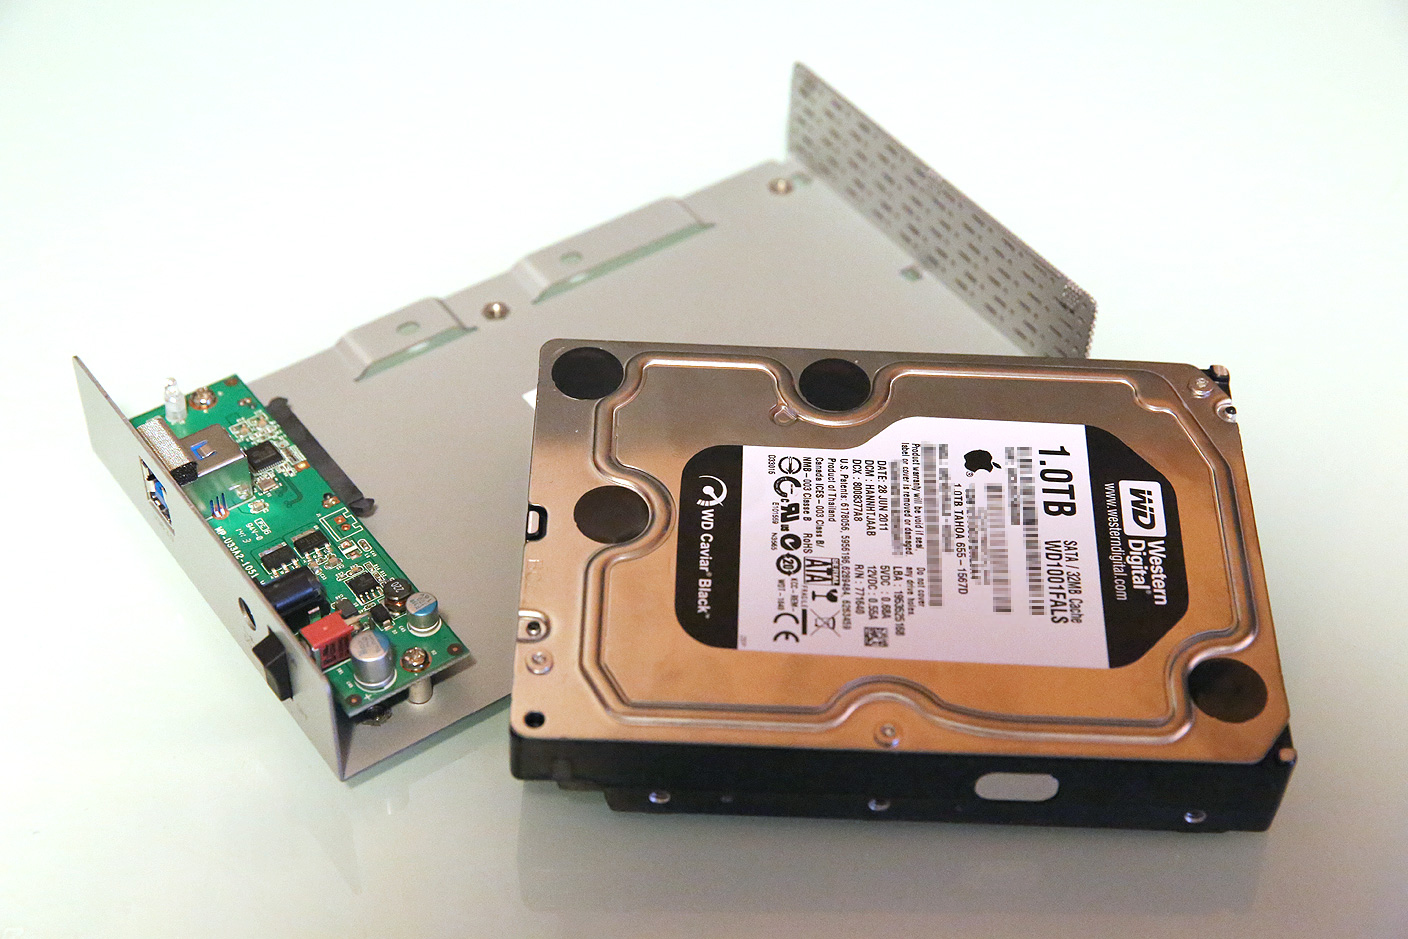 install ssd to run operating system but keep hdd for files mac mini